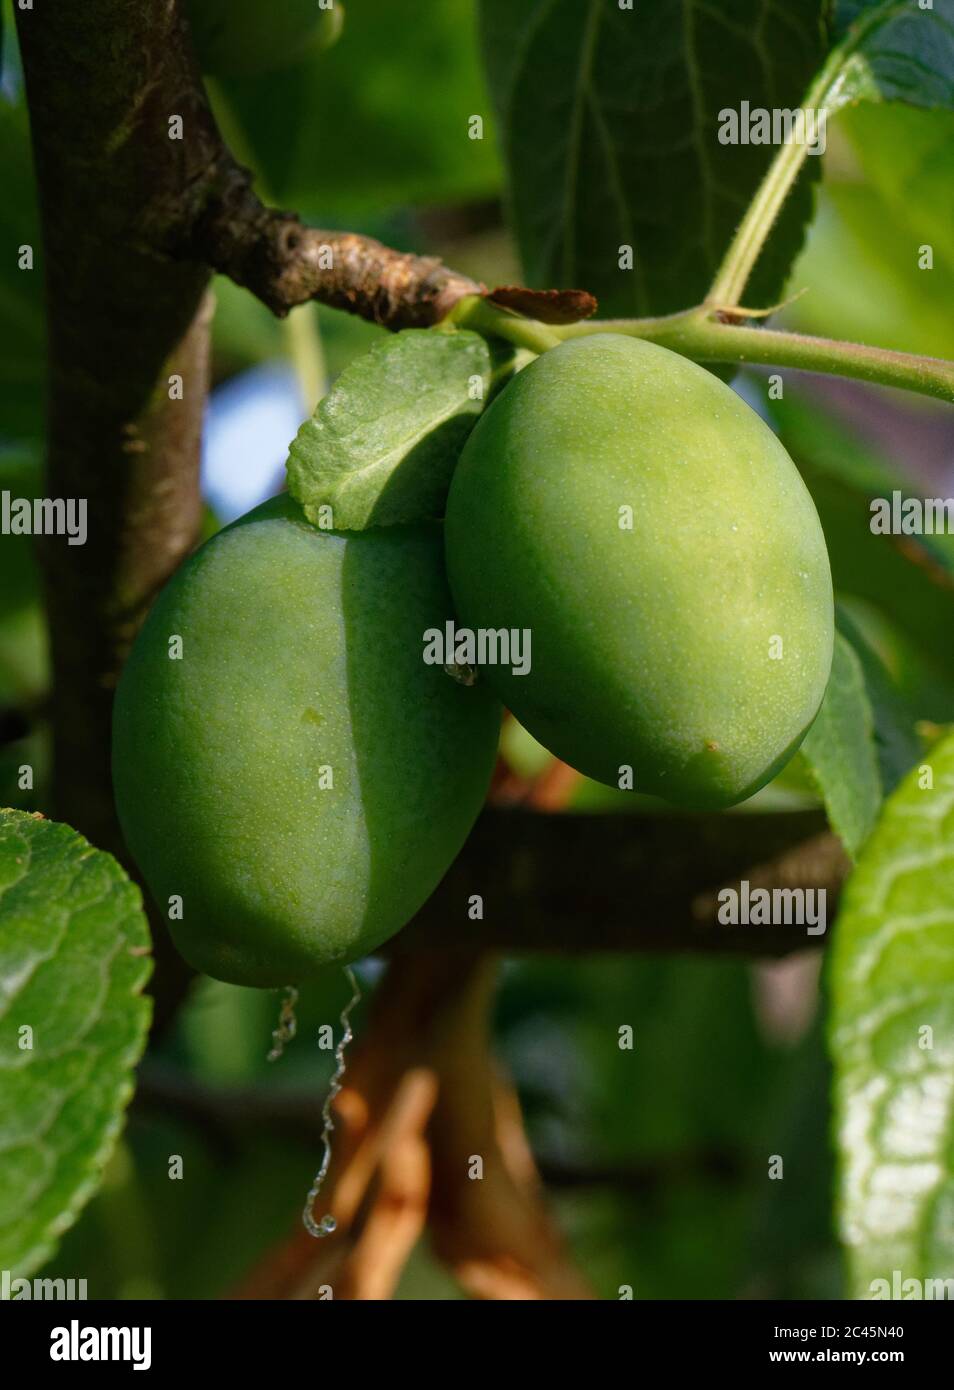 Young plums, still green, ripening on branches of a plum tree, shallow depth of field Stock Photo